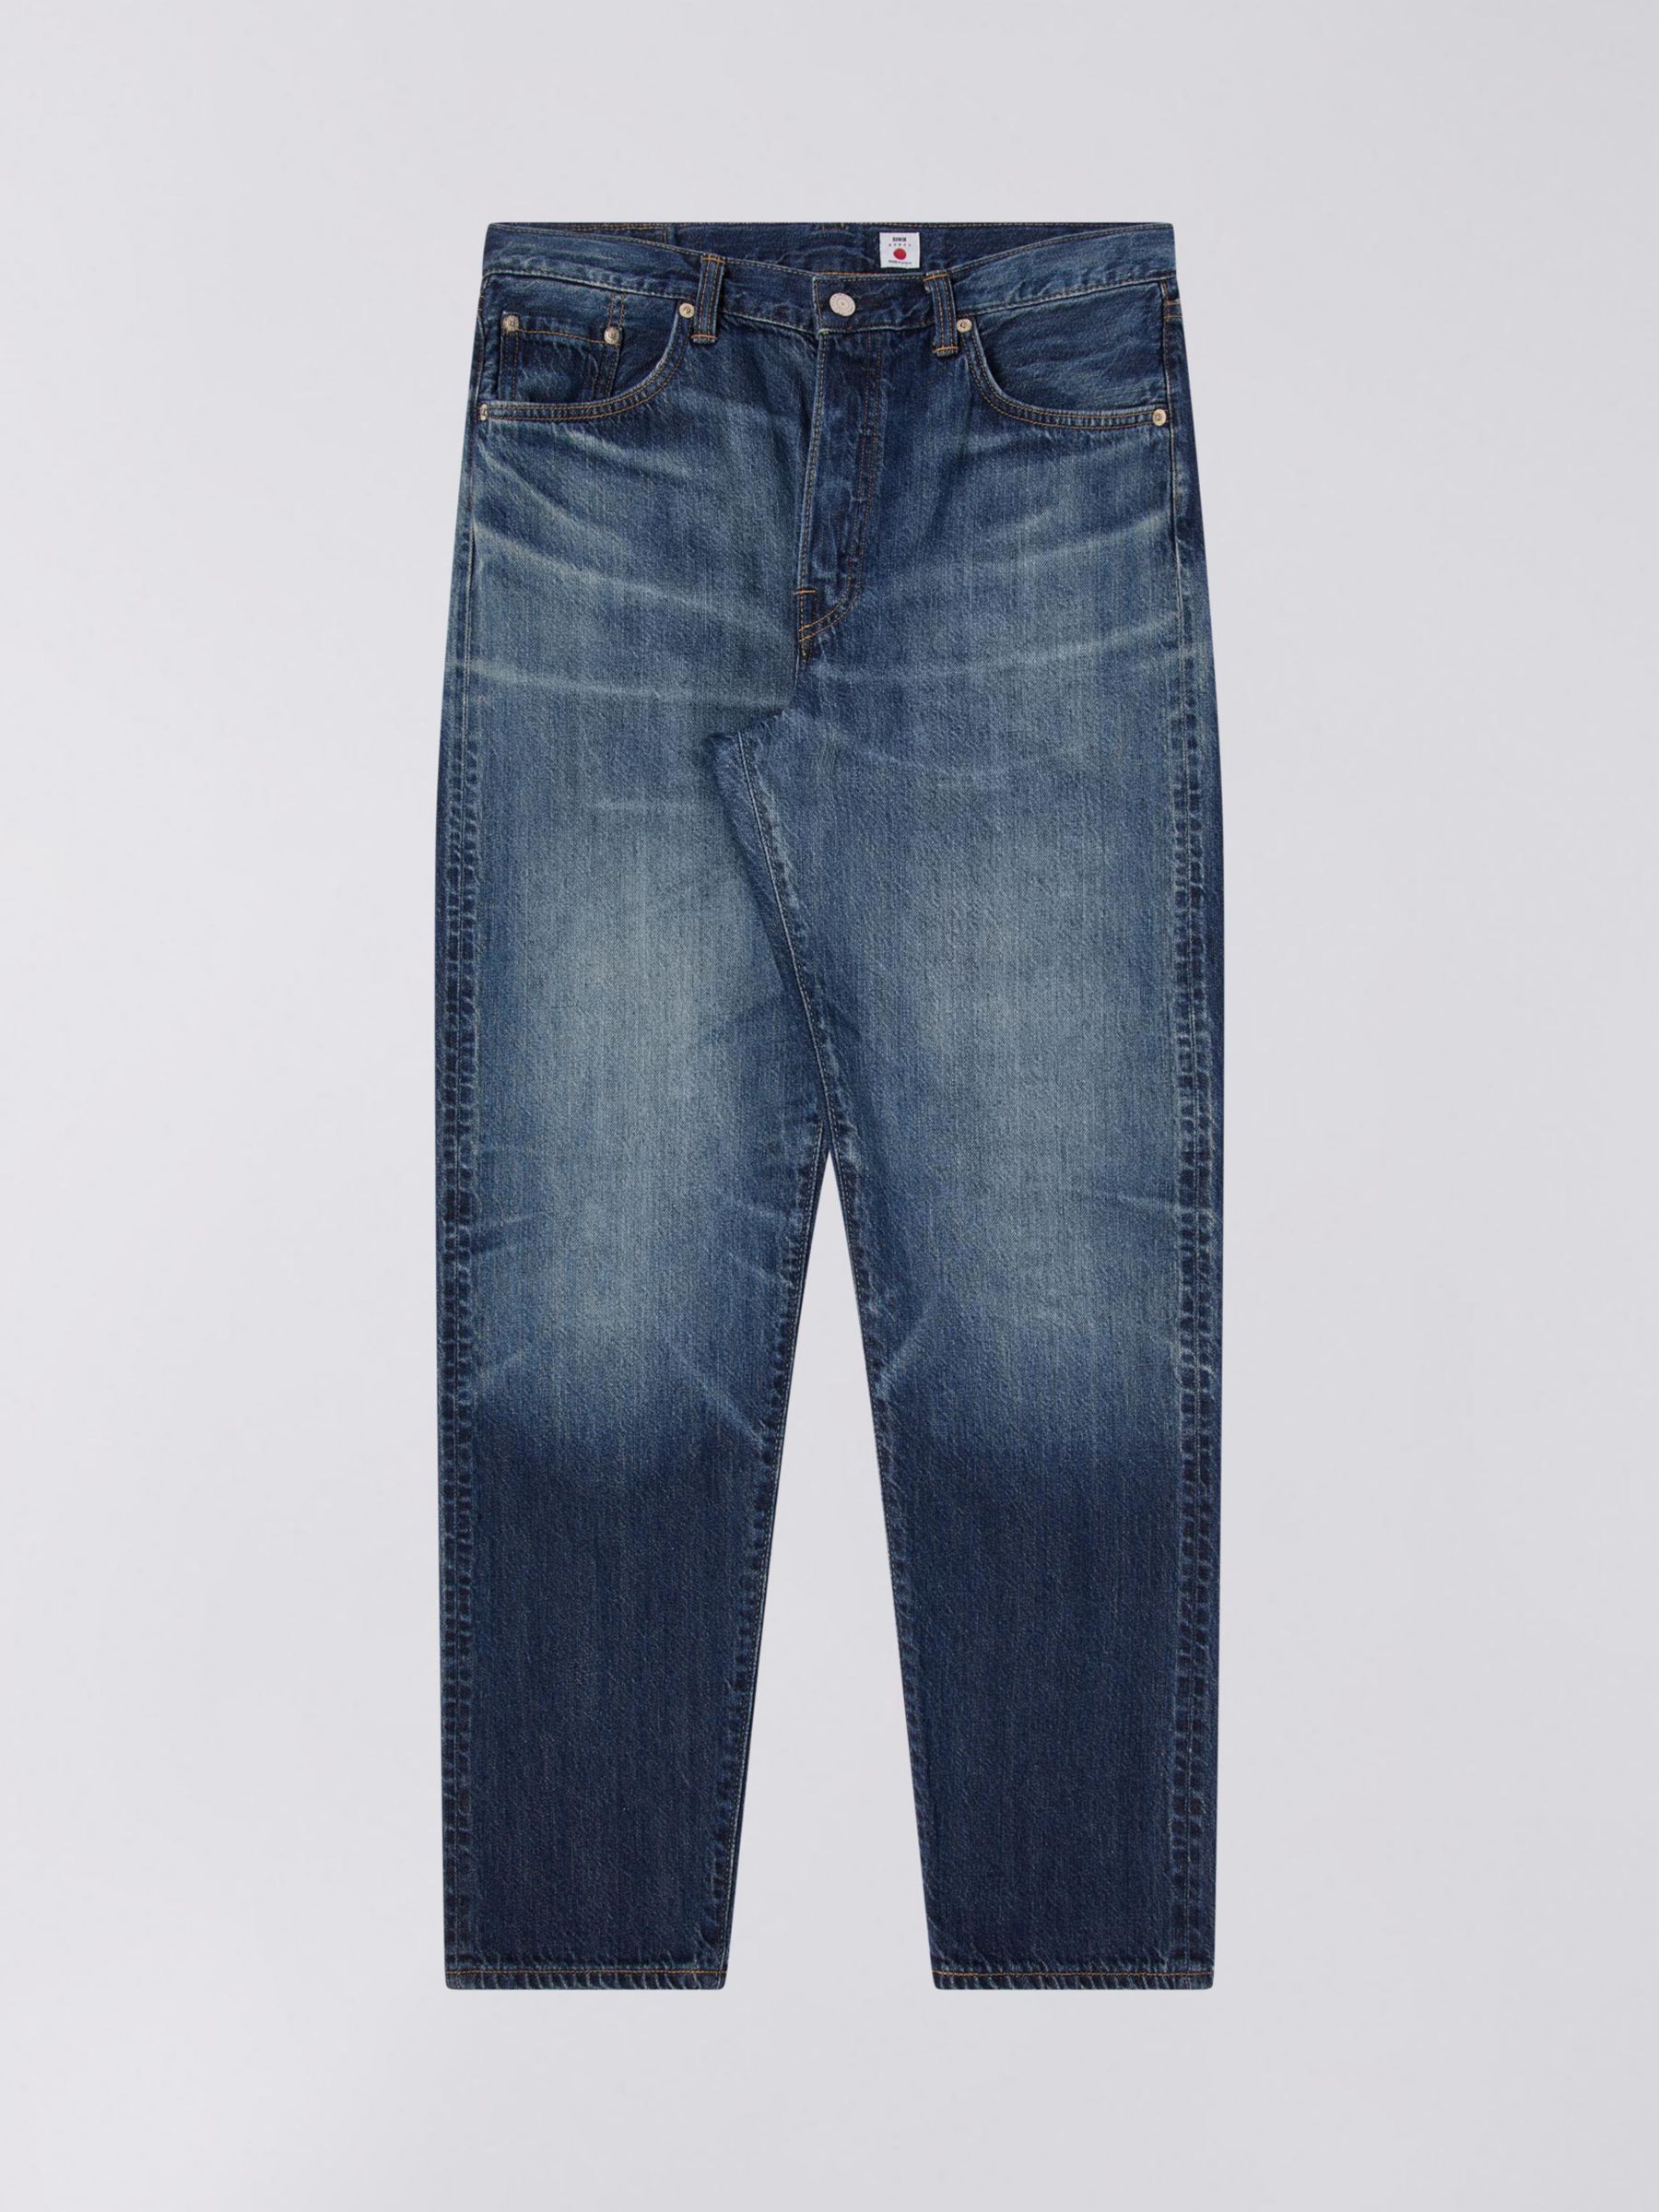 Edwin Kaihara Tapered Jeans, Blue, 32R